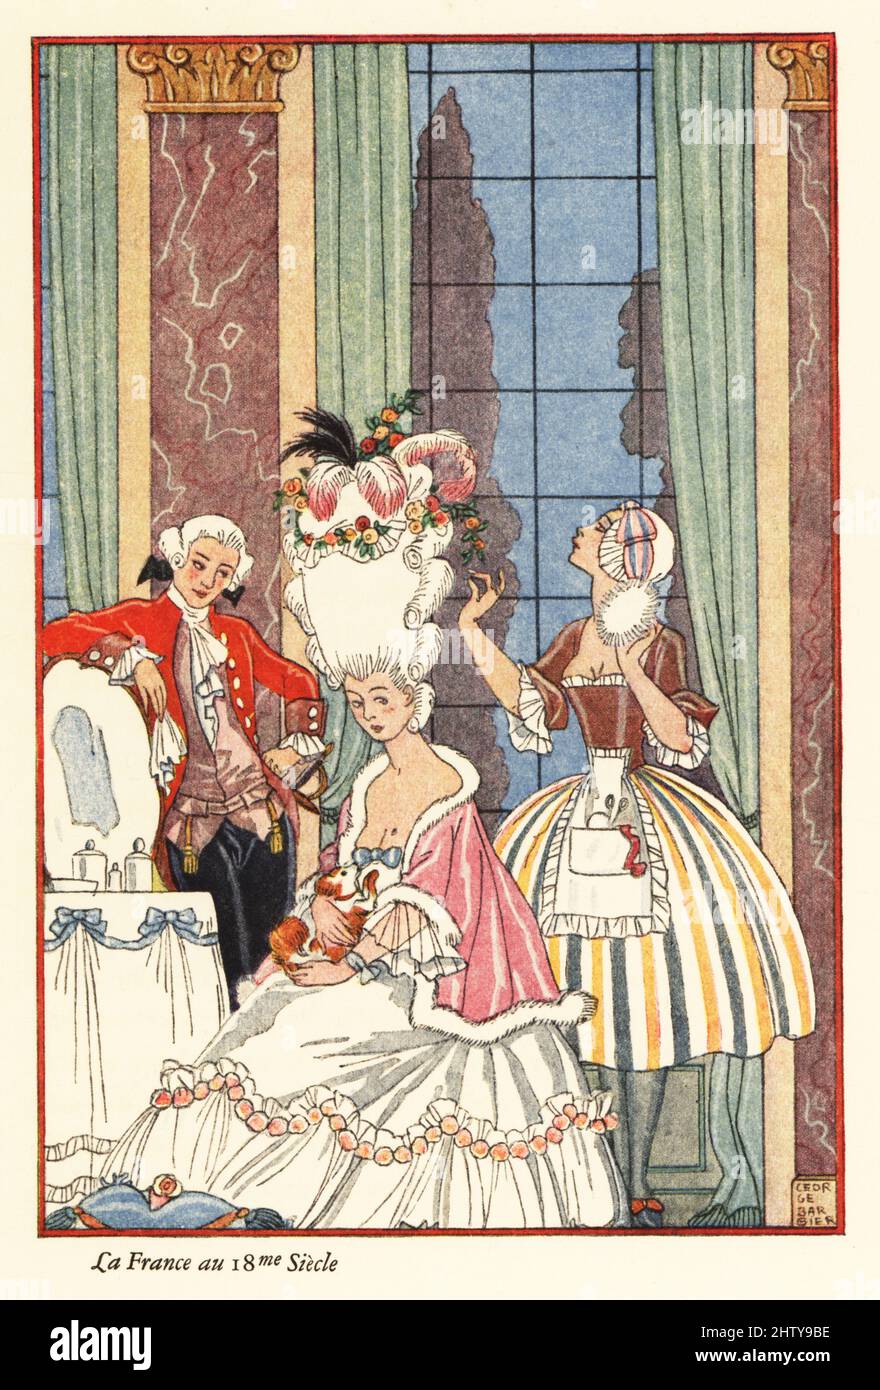 A noble woman at her toilette in the era of Marie Antoinette, 18th century France. A hairdresser with a powder puff fixes the woman's huge pouffe hair-do. The woman sits holding a lap dog. La France au 18me Siecle. Smithsonian-process colour print after Art Deco master George Barbier from Richard le Gallienne’s Romance of Perfume, Hudnut, New York, 1928. Stock Photo